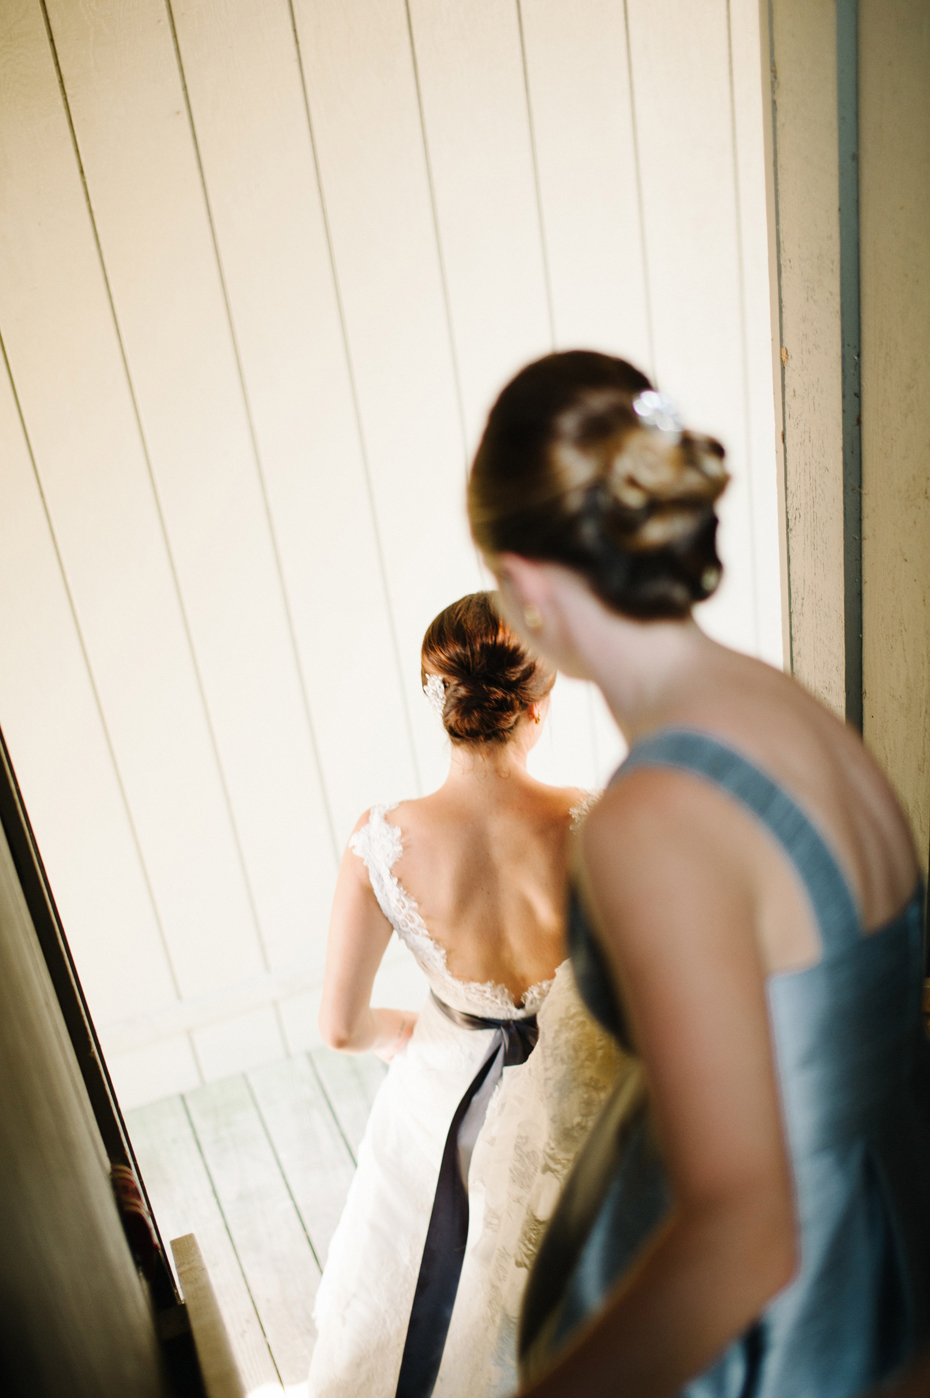 A bride walks through the grounds before her wedding at The Inn at Stonecliffe on Mackinac Island by Michigan Wedding Photographer Heather Jowett.